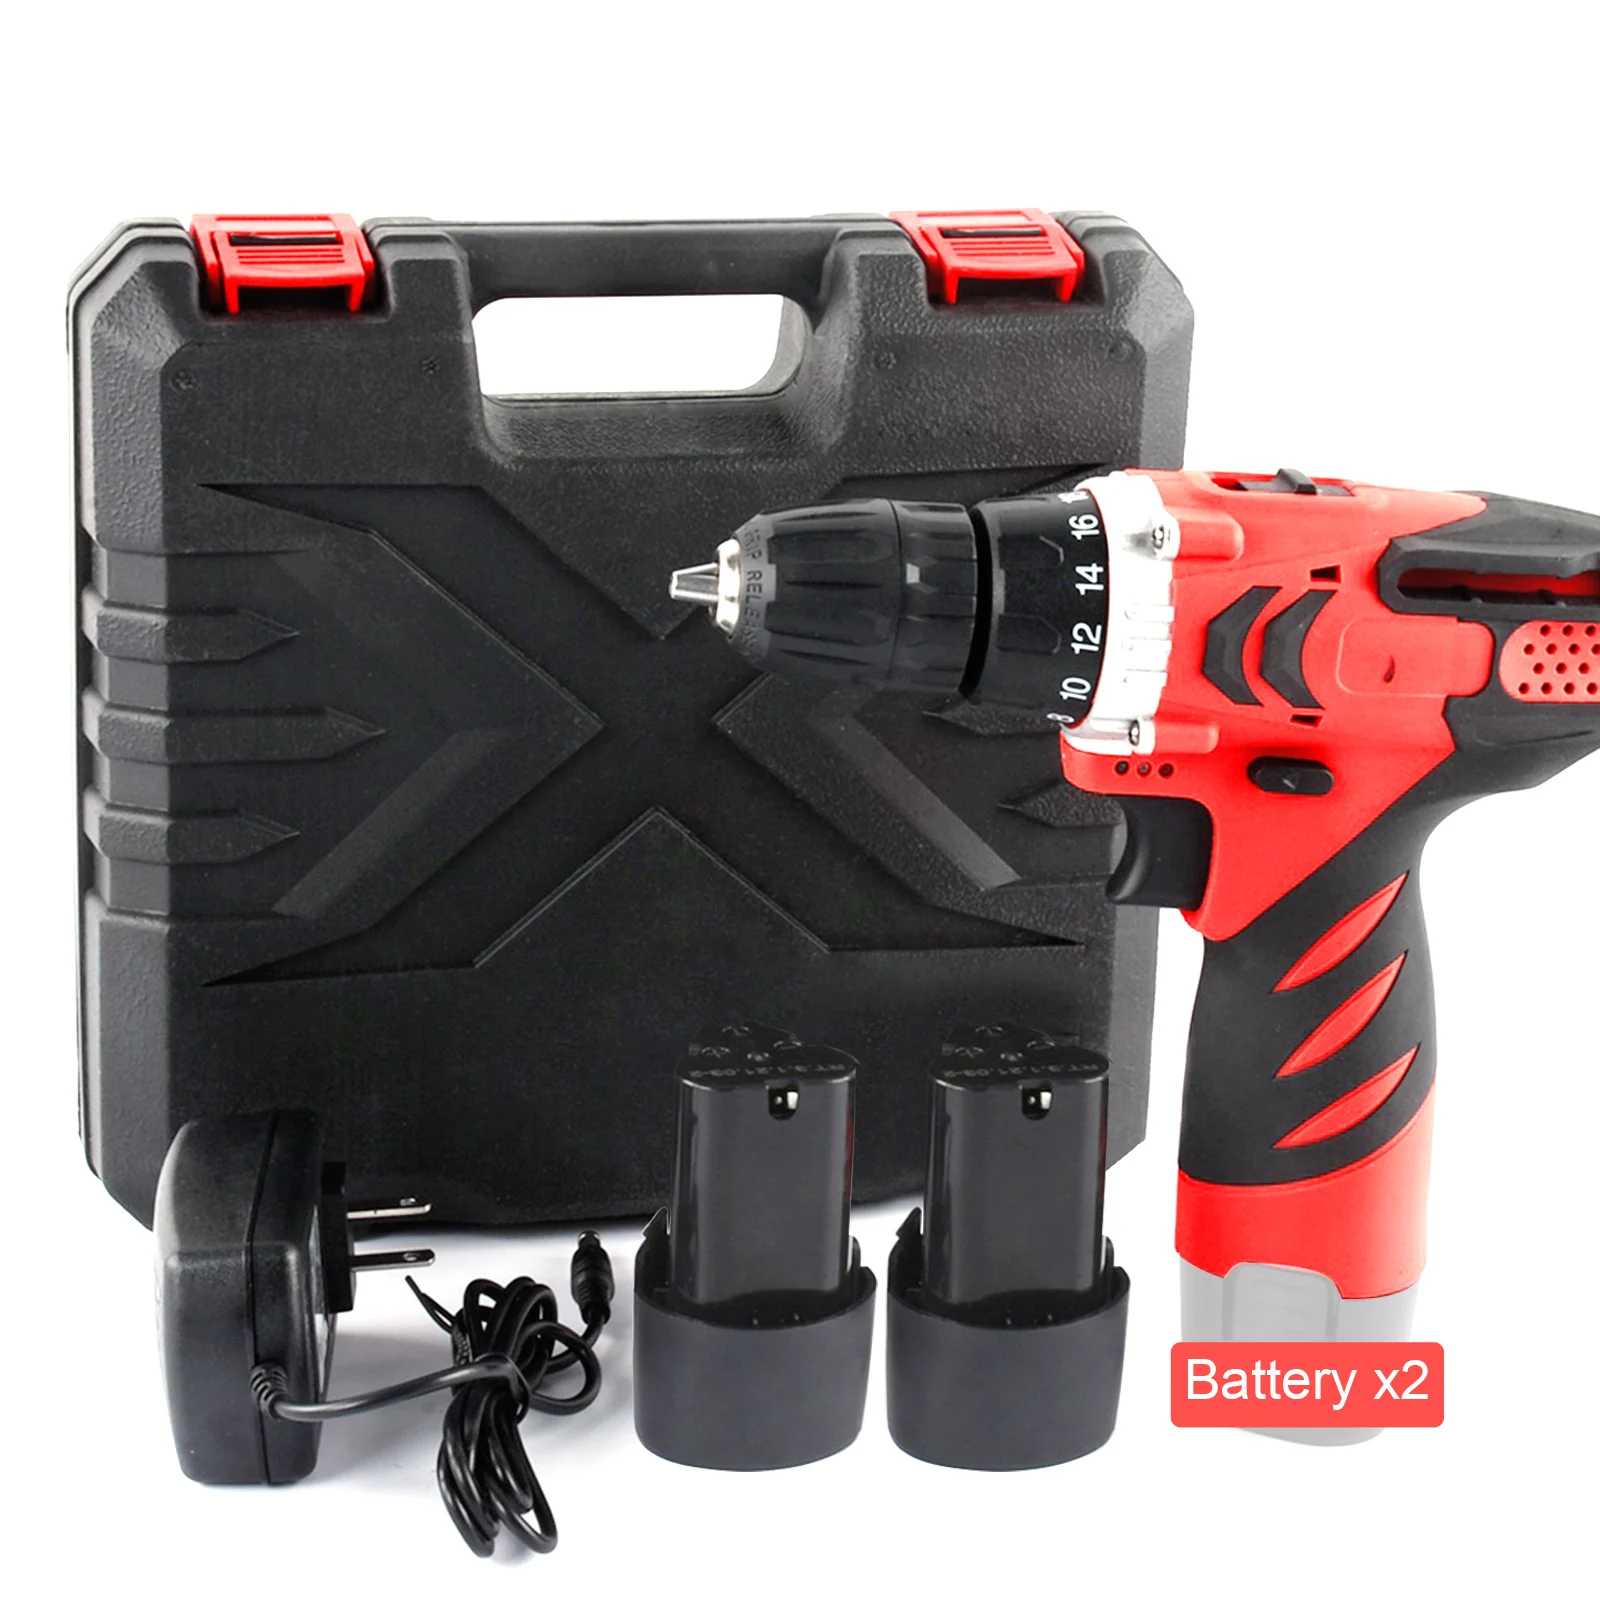 12V 5.5-20 N.M Cordless Drill DC Brushed Battery Drill Rechargeable Electric Drill Set Rubber Handle US/EU/UK/AU Plug Power Tool